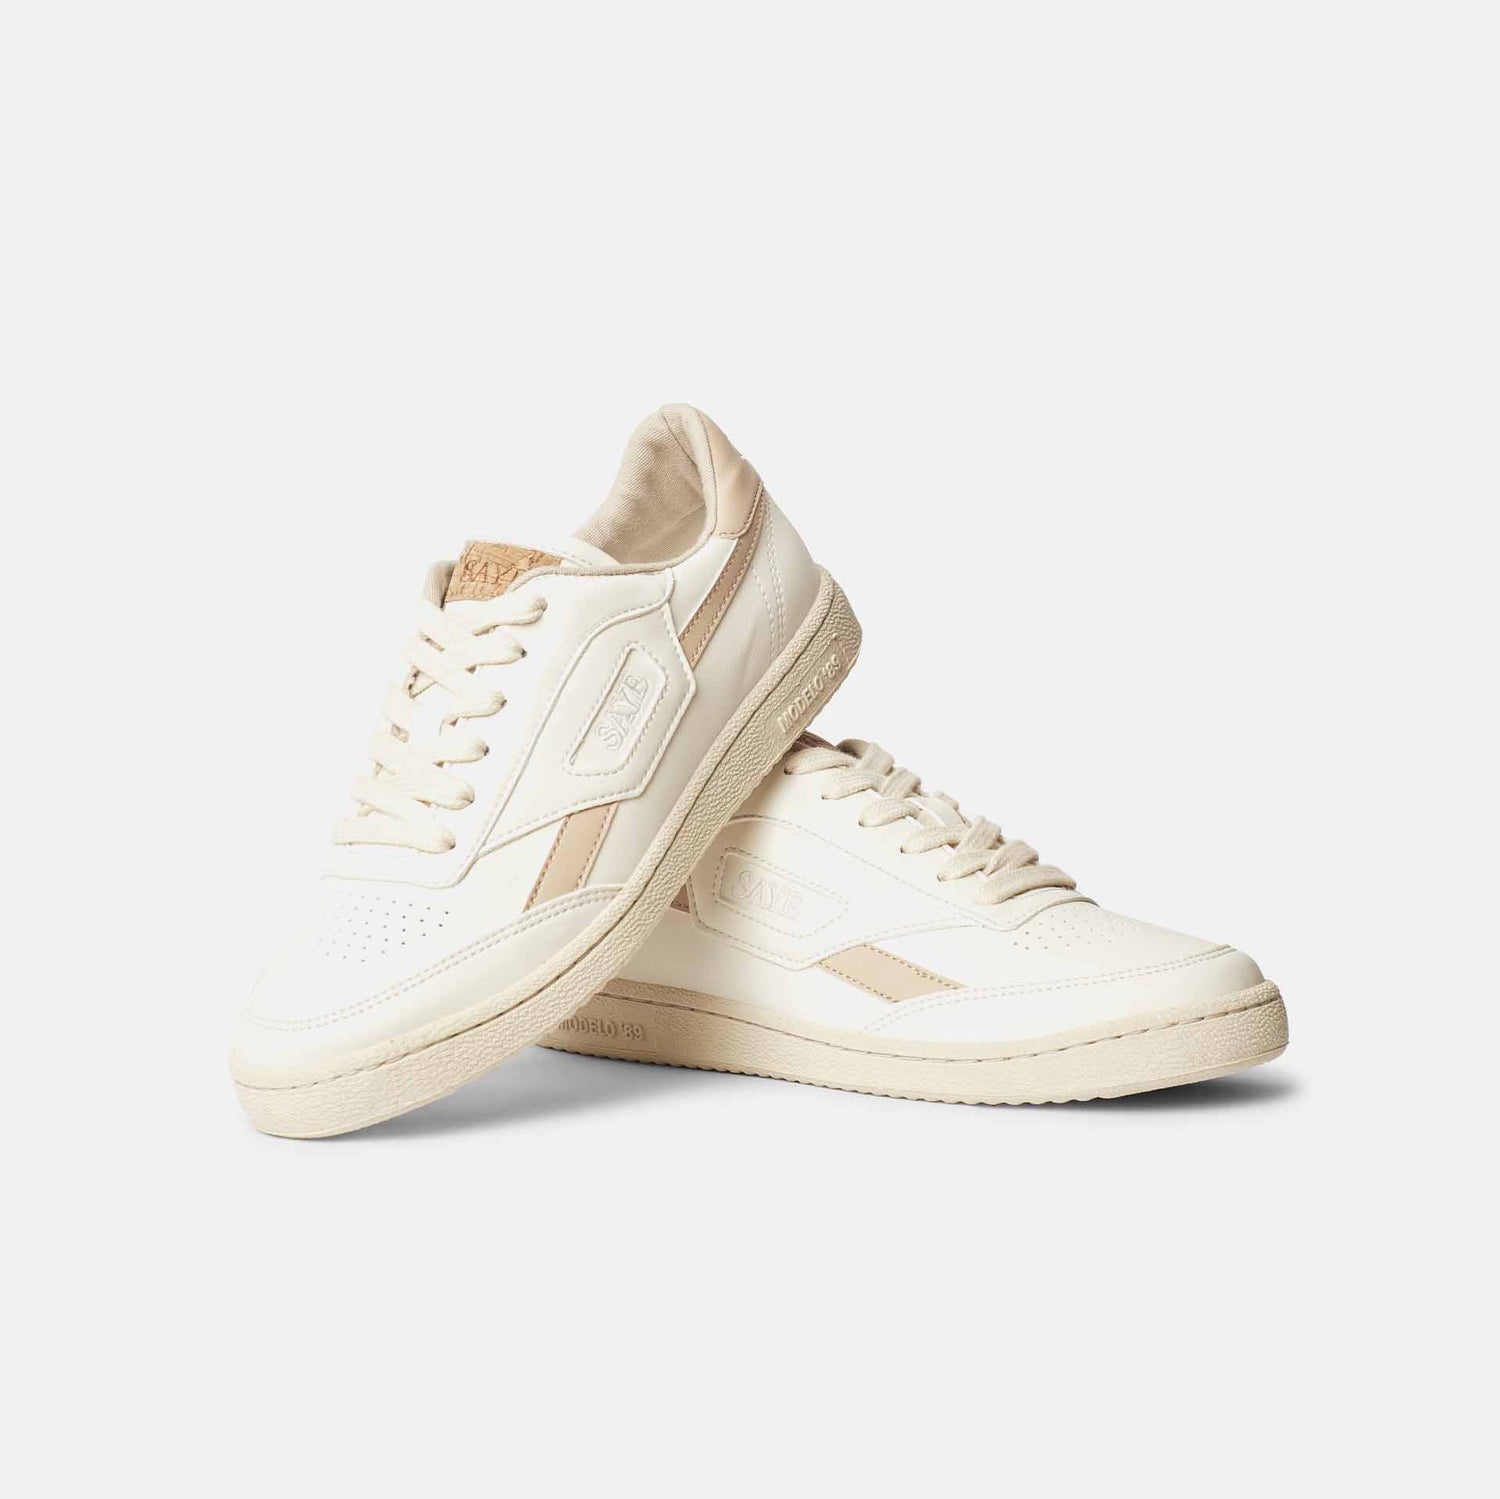 A pair of SAYE Modelo '89 Sneakers - Beige on a white surface.